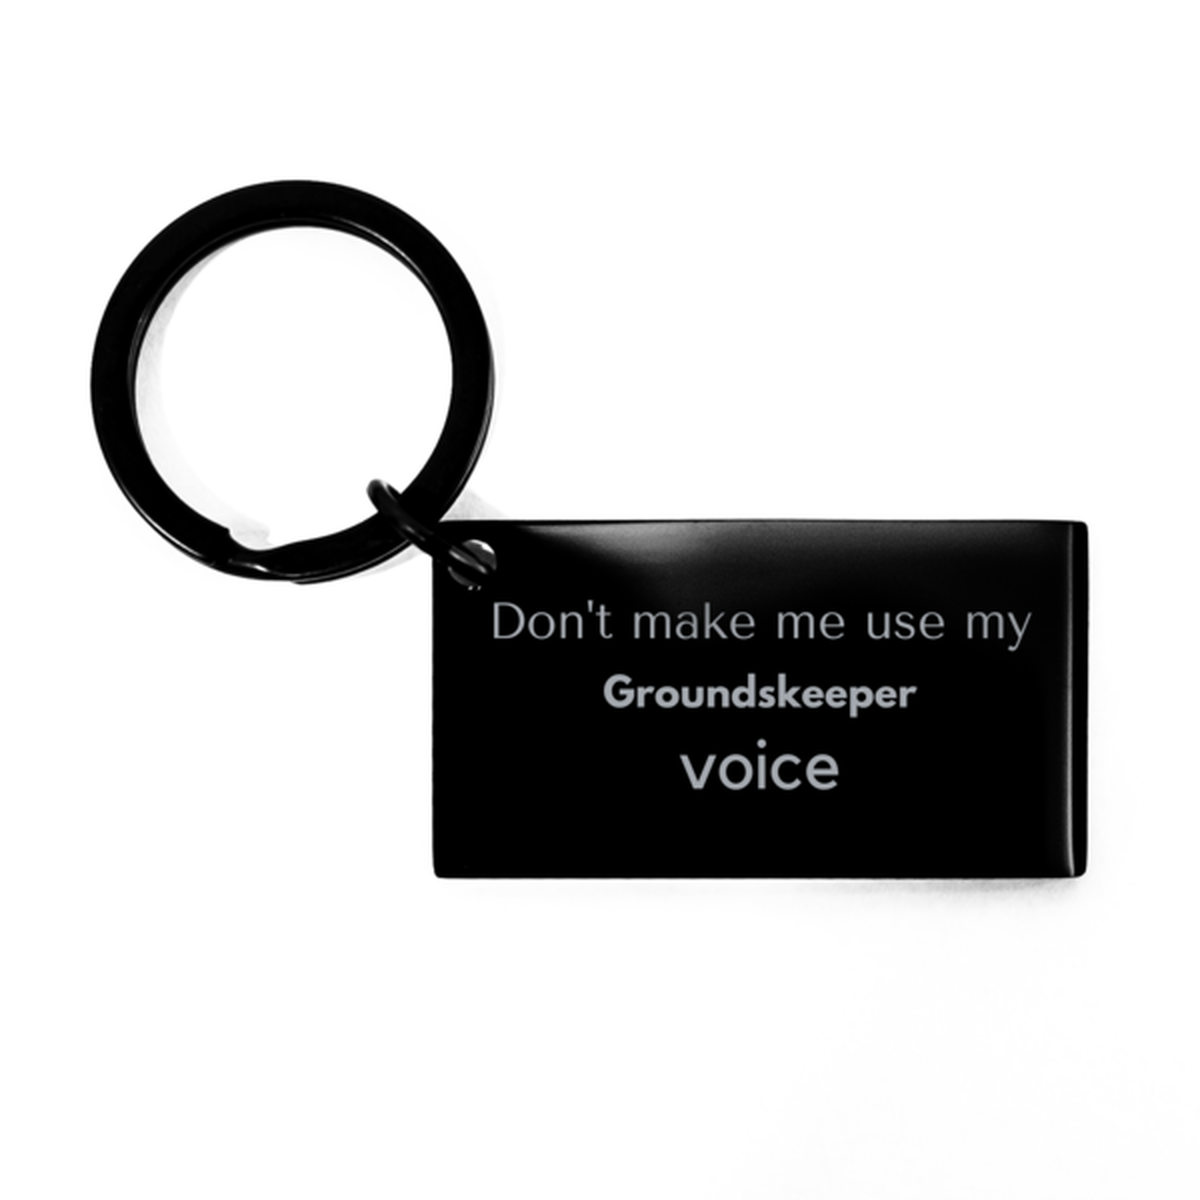 Don't make me use my Groundskeeper voice, Sarcasm Groundskeeper Gifts, Christmas Groundskeeper Keychain Birthday Unique Gifts For Groundskeeper Coworkers, Men, Women, Colleague, Friends